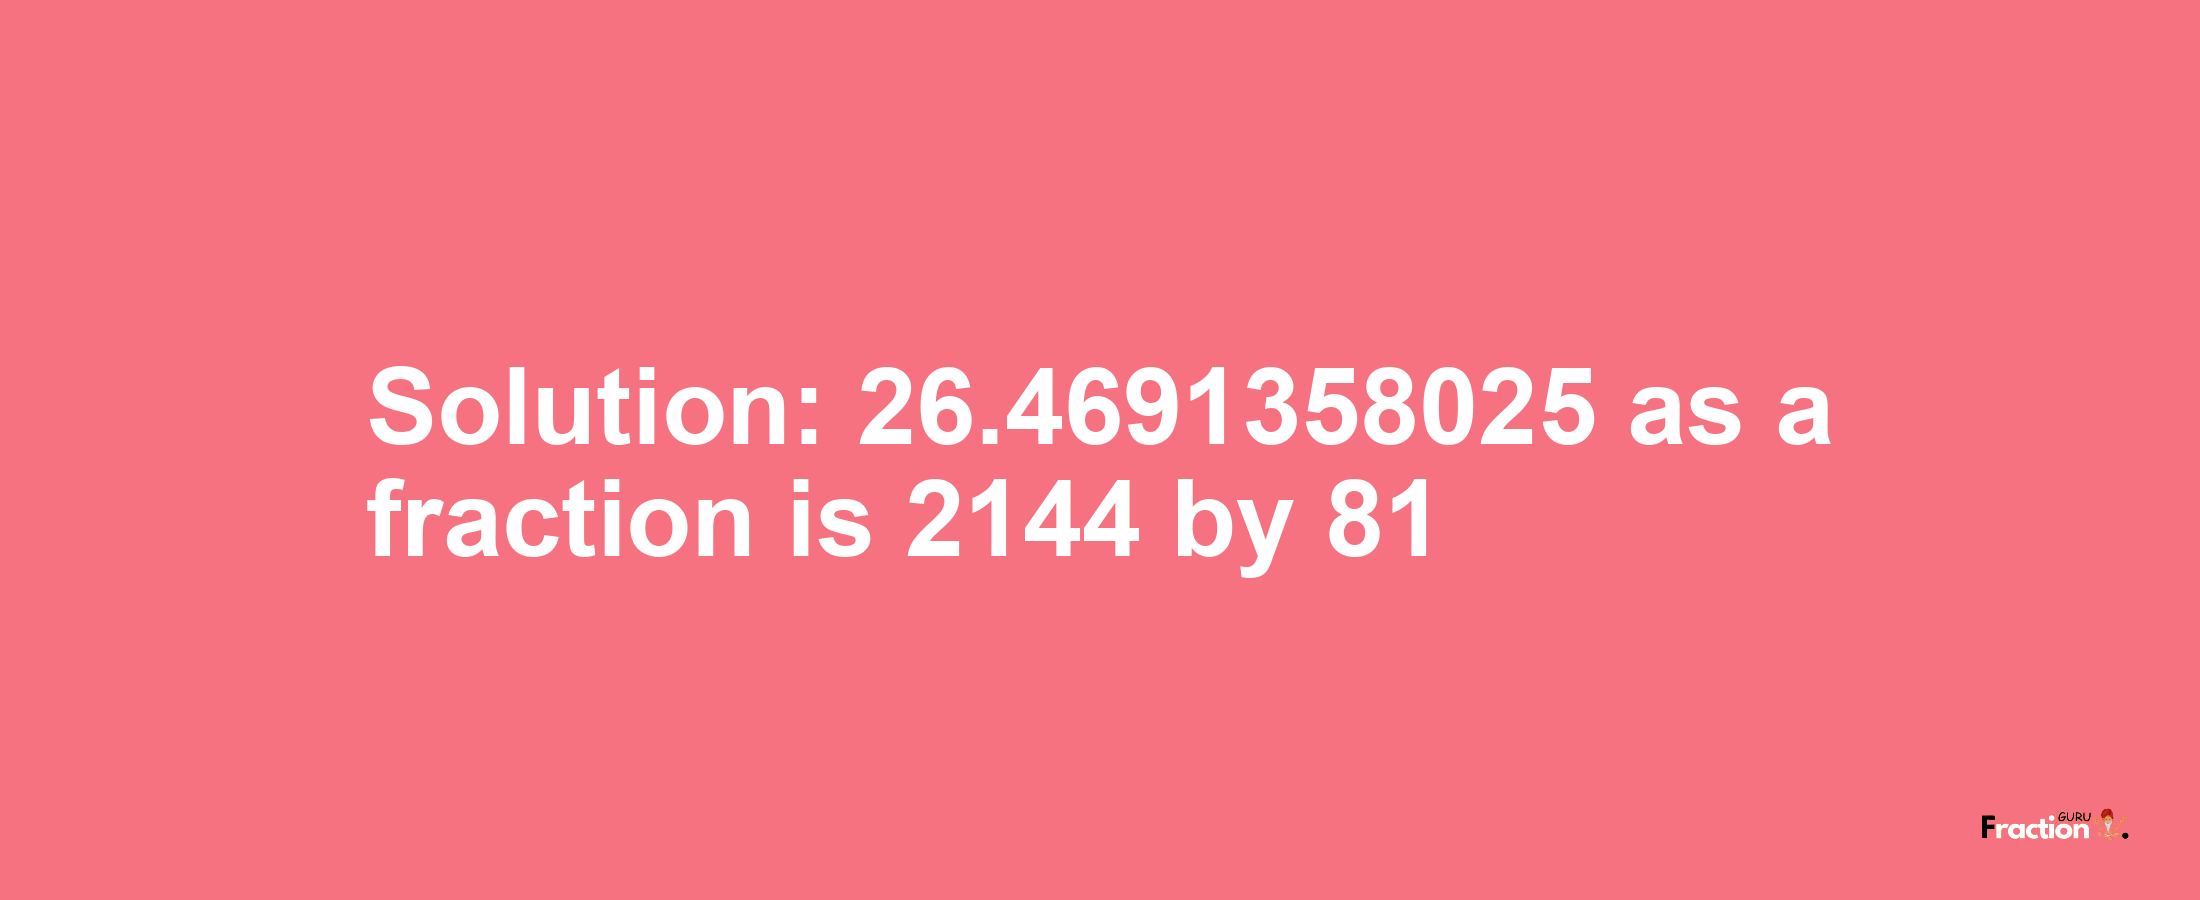 Solution:26.4691358025 as a fraction is 2144/81